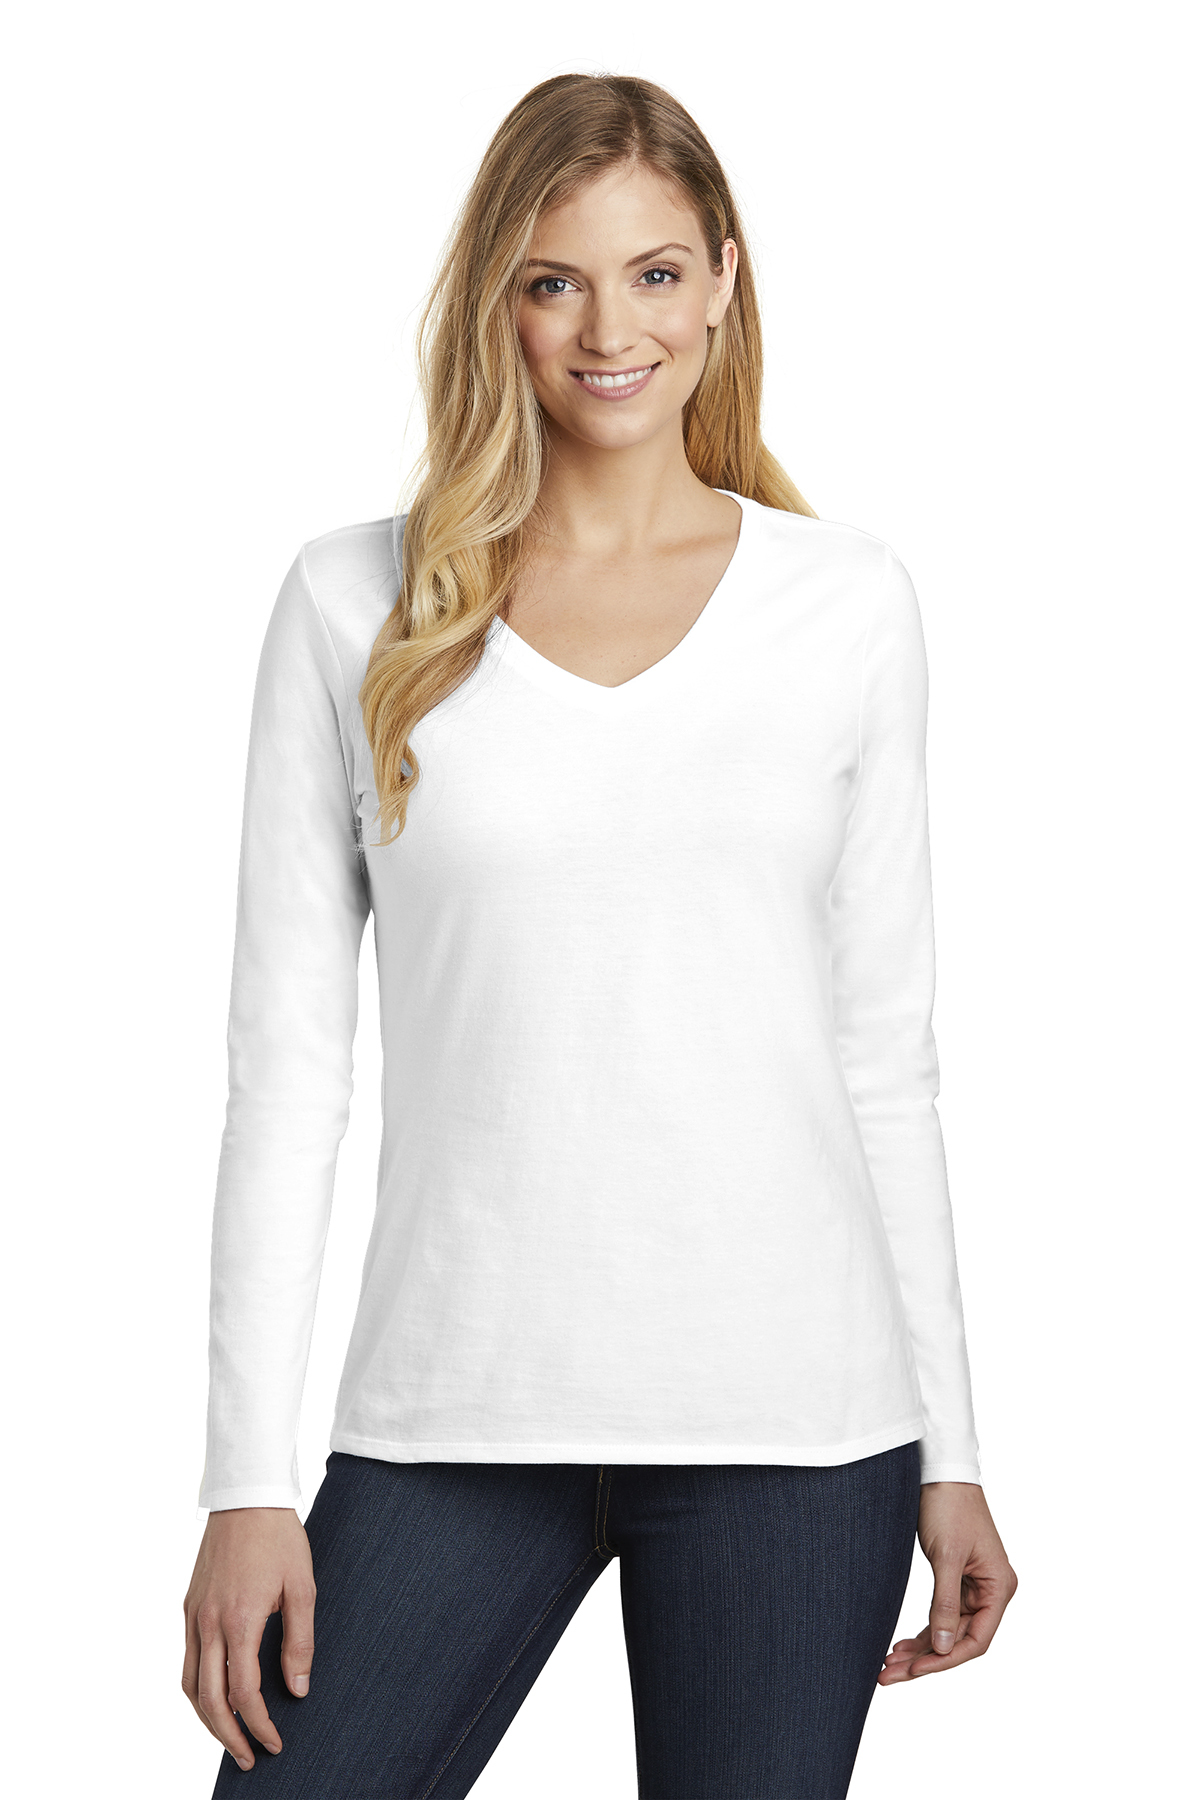 District DT6201 - Women's Very Important Tee Long Sleeve V-neck